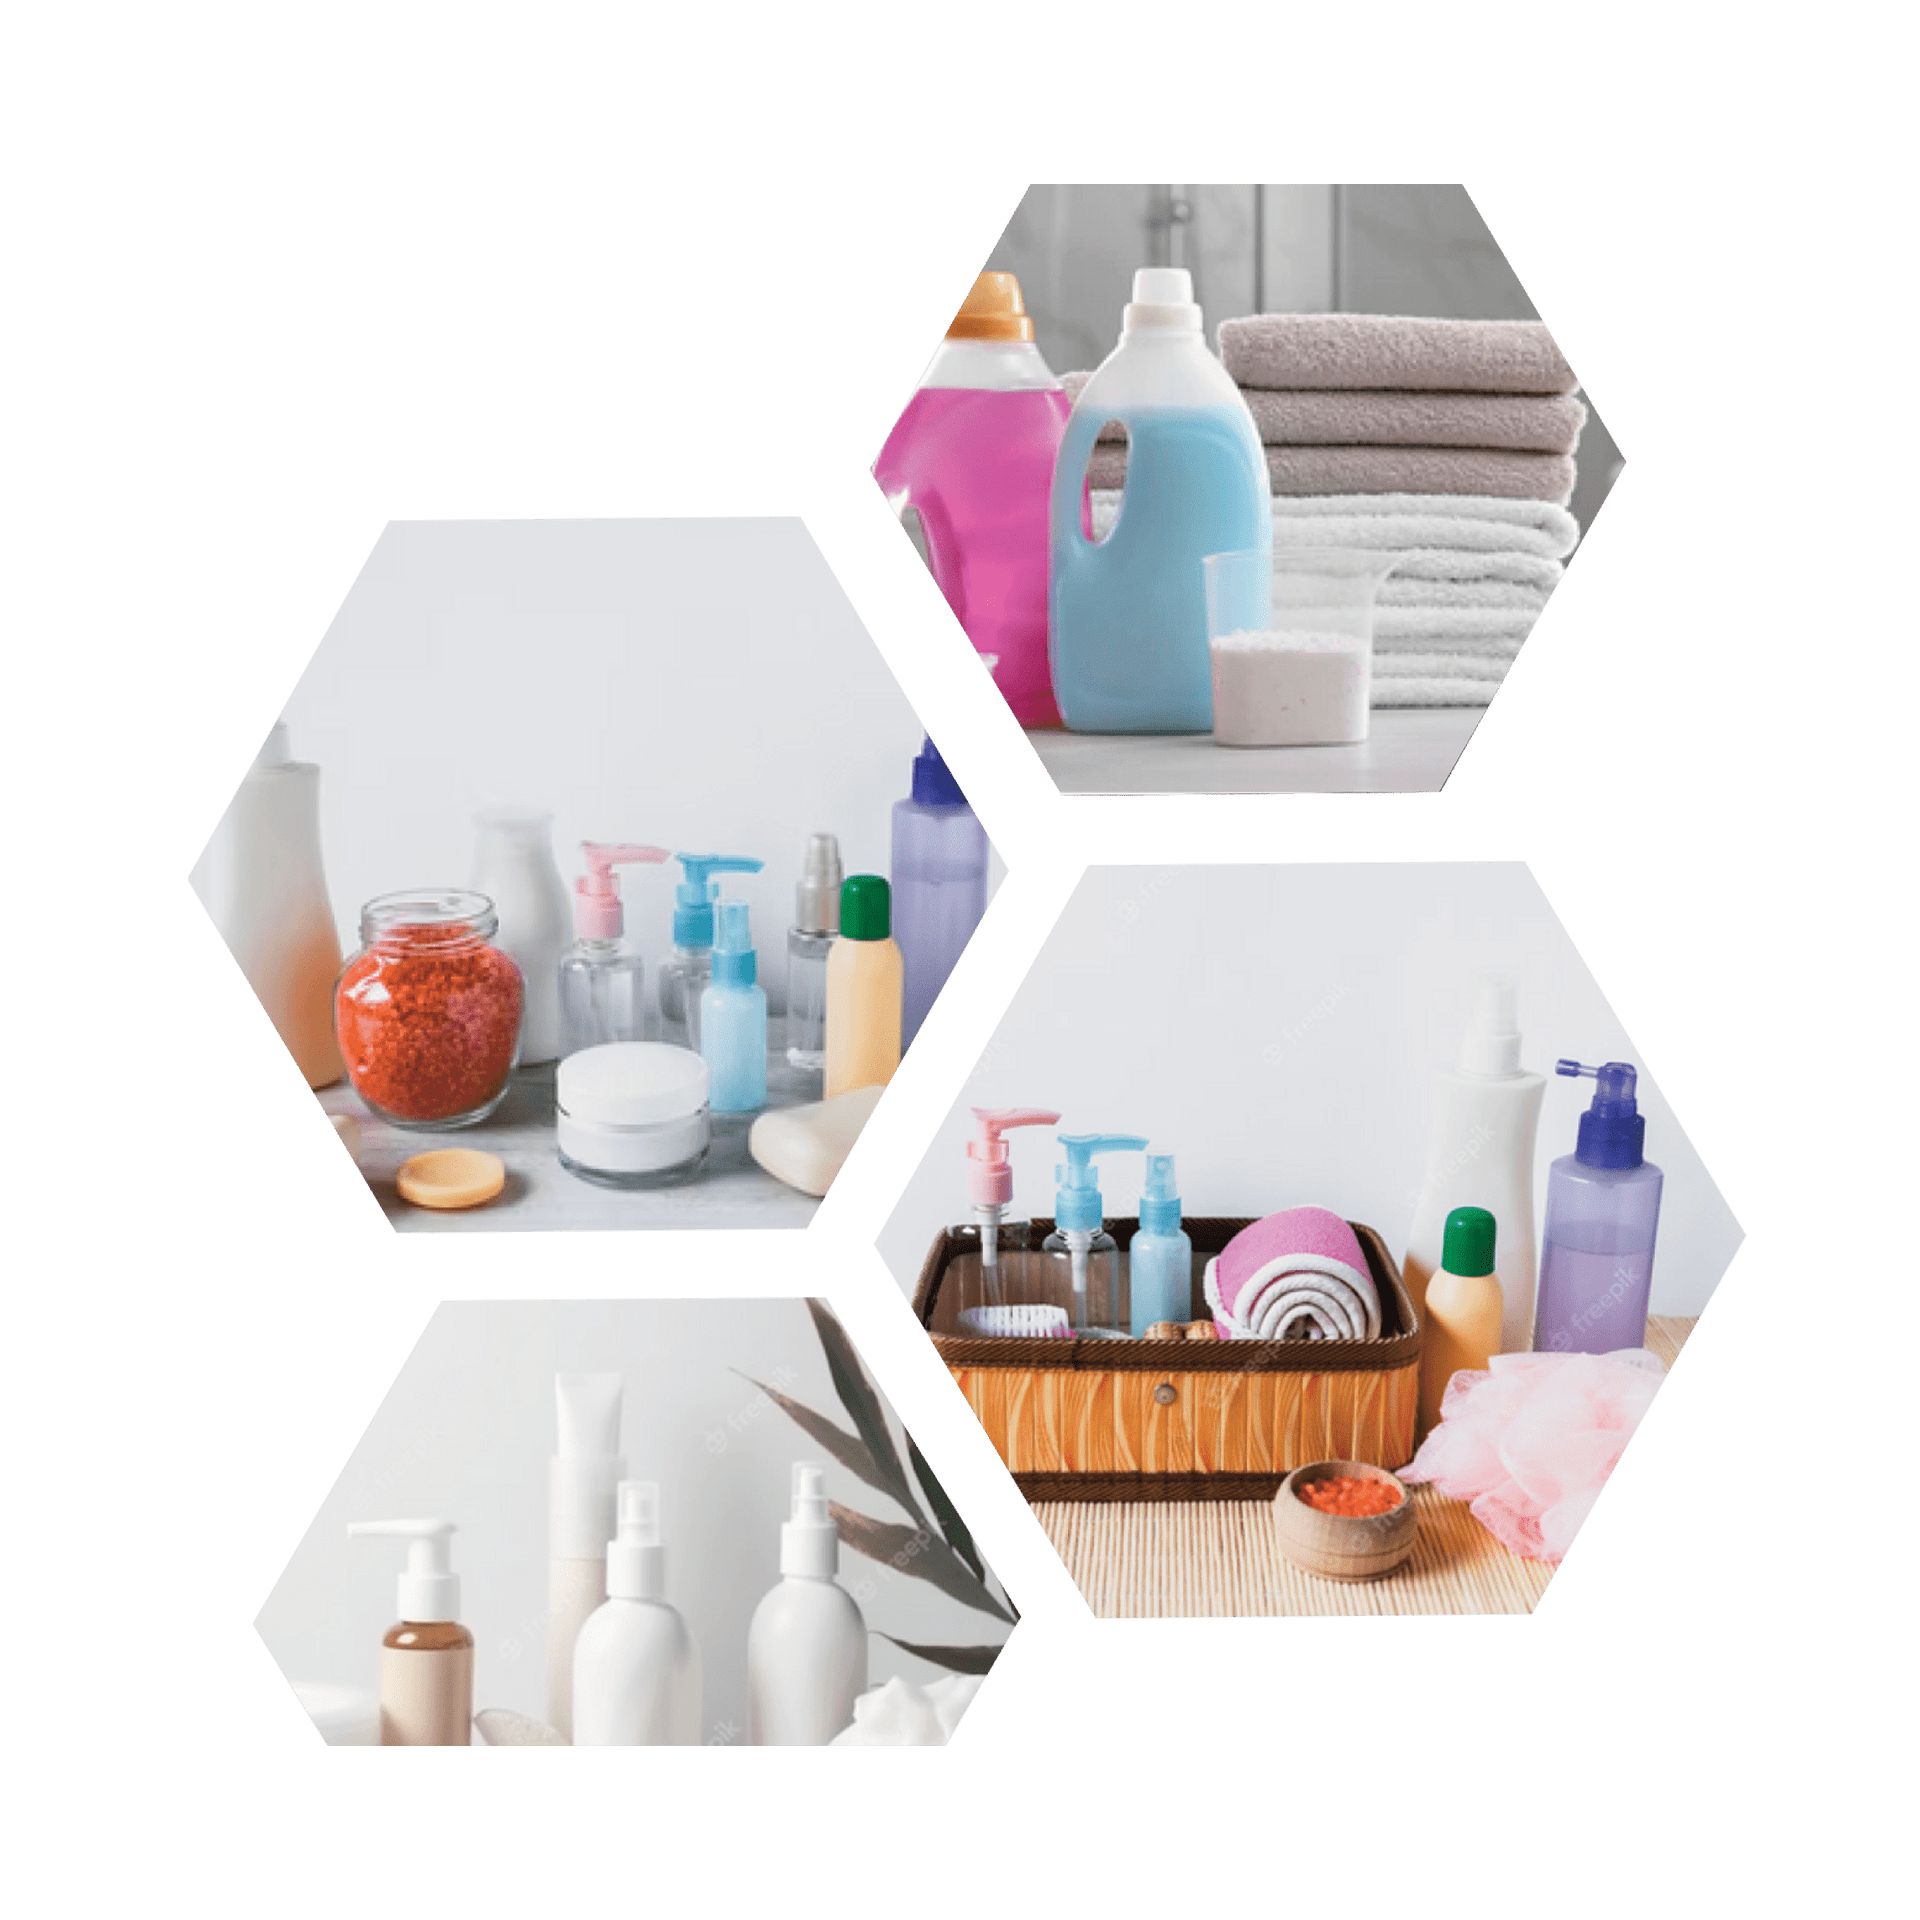 Home care products processing & packaging machinery